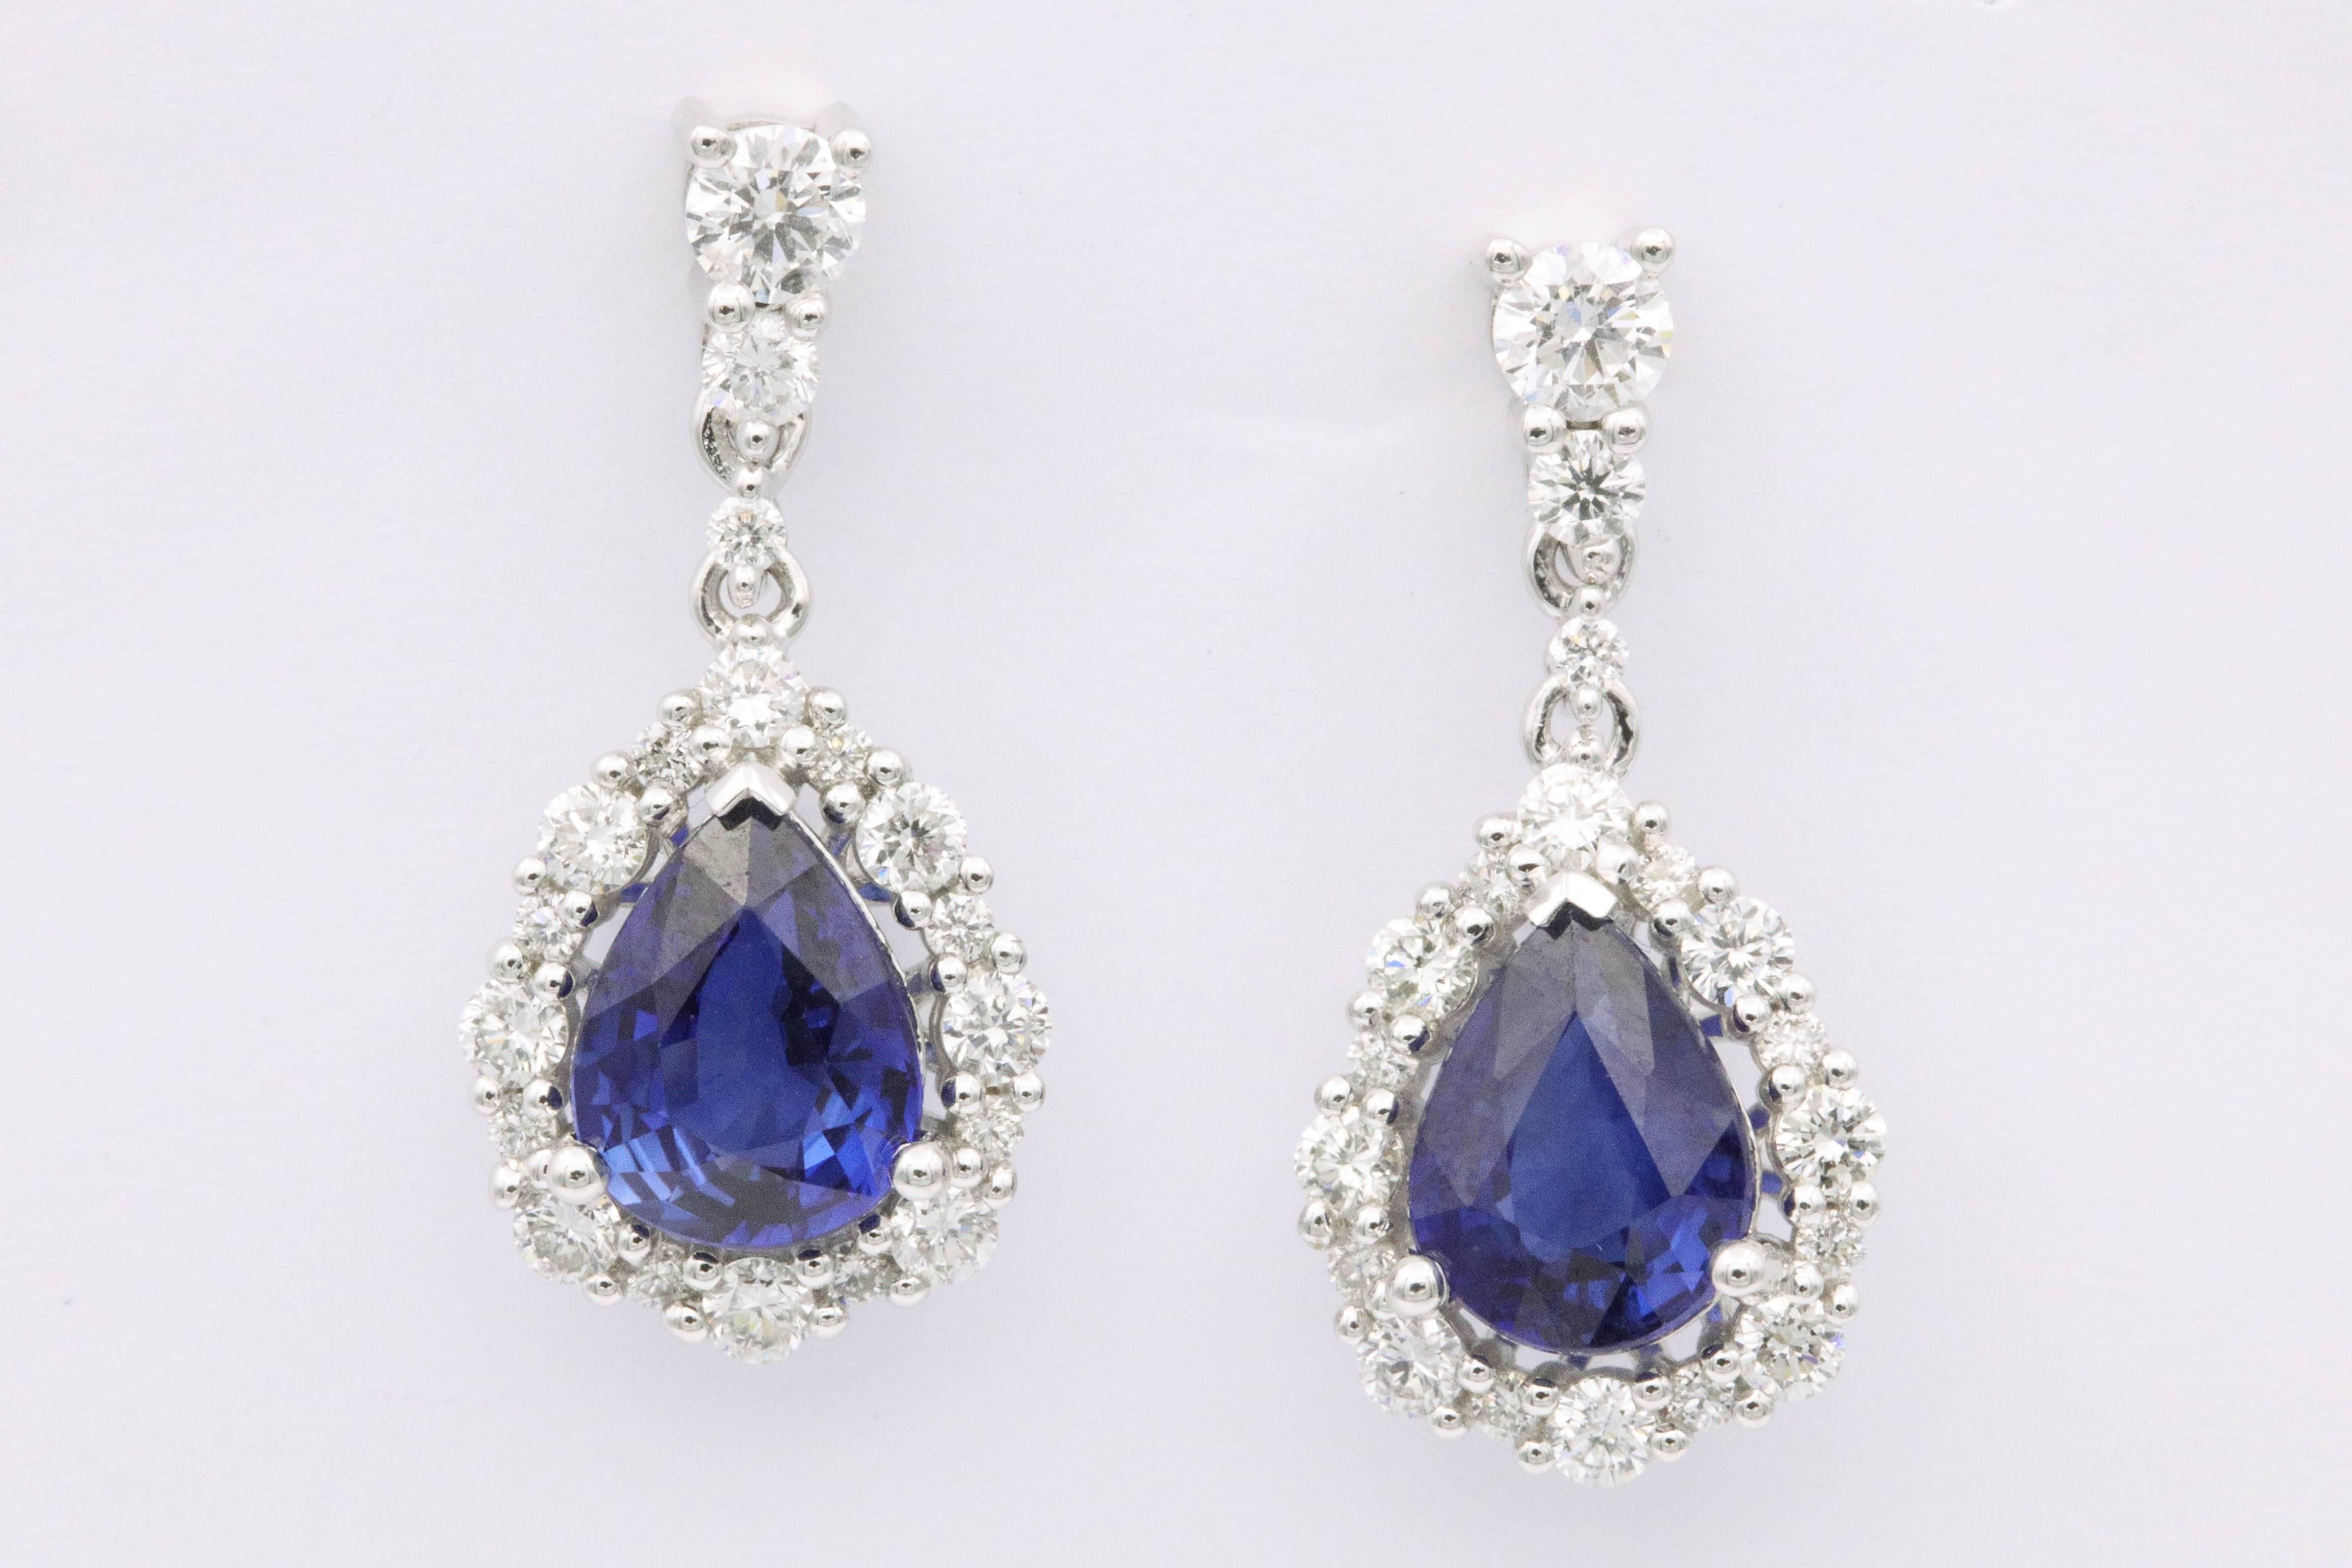 2 Sapphires 2.5 carats T/W 
38 diamonds 0.83 Carats T/w
Each Sapphire is measuring 8 X 6 mm
The Earrings are 2 cm long/ 0.80 inches
18K white gold